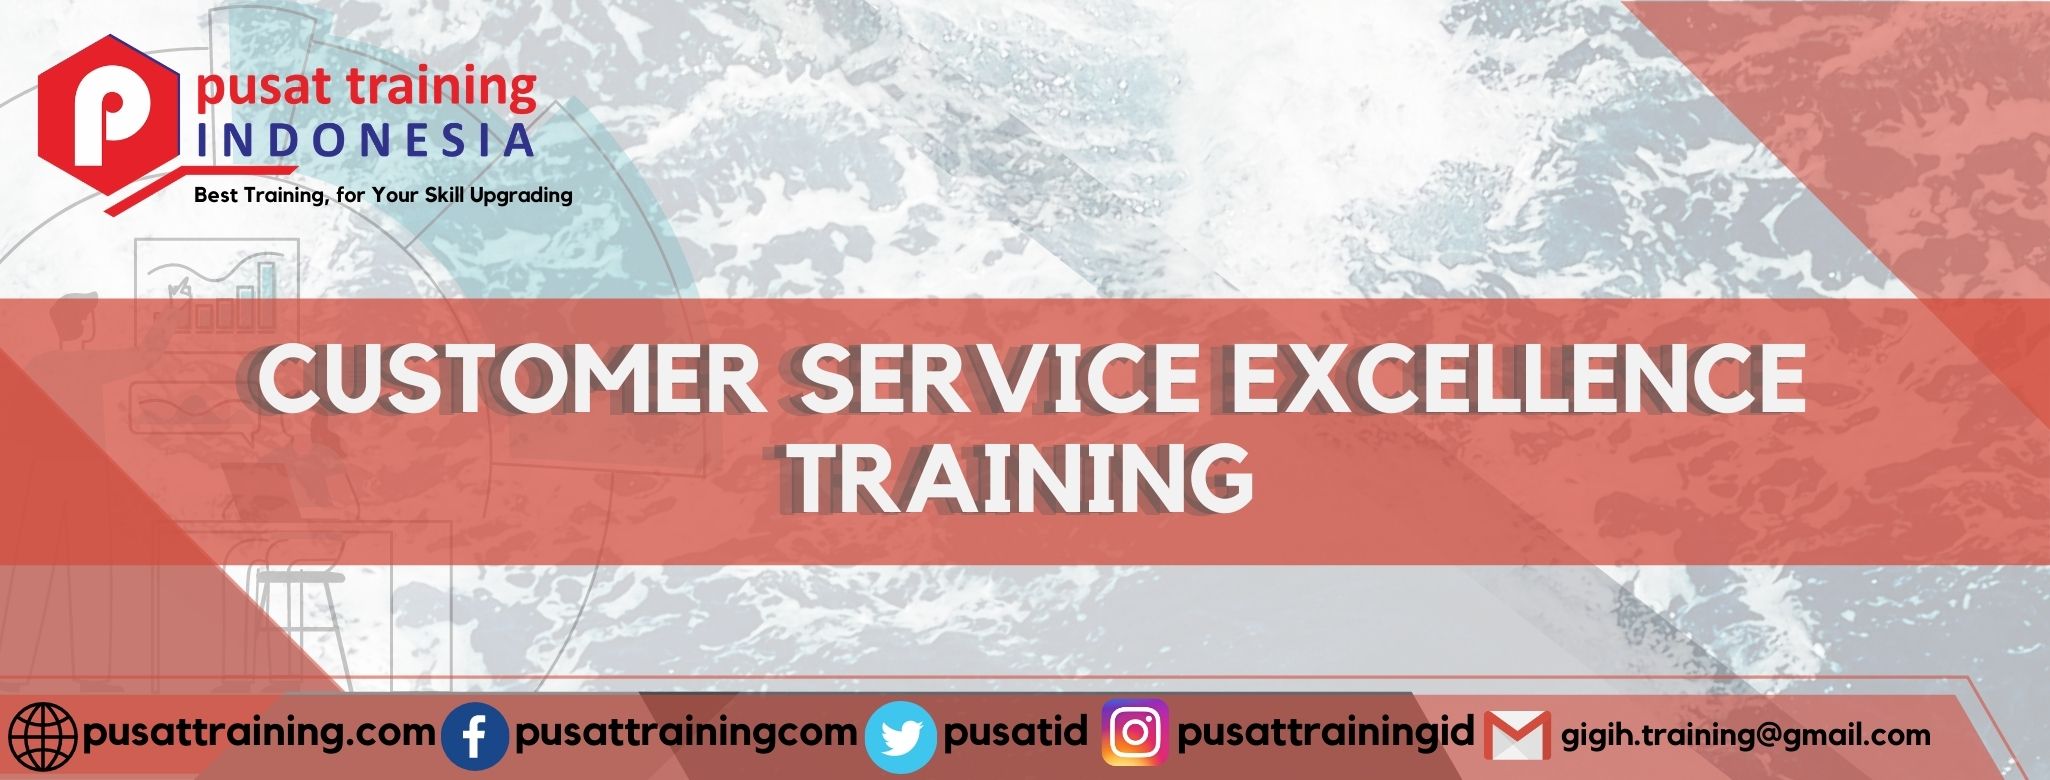 CUSTOMER SERVICE EXCELLENCE TRAINING 